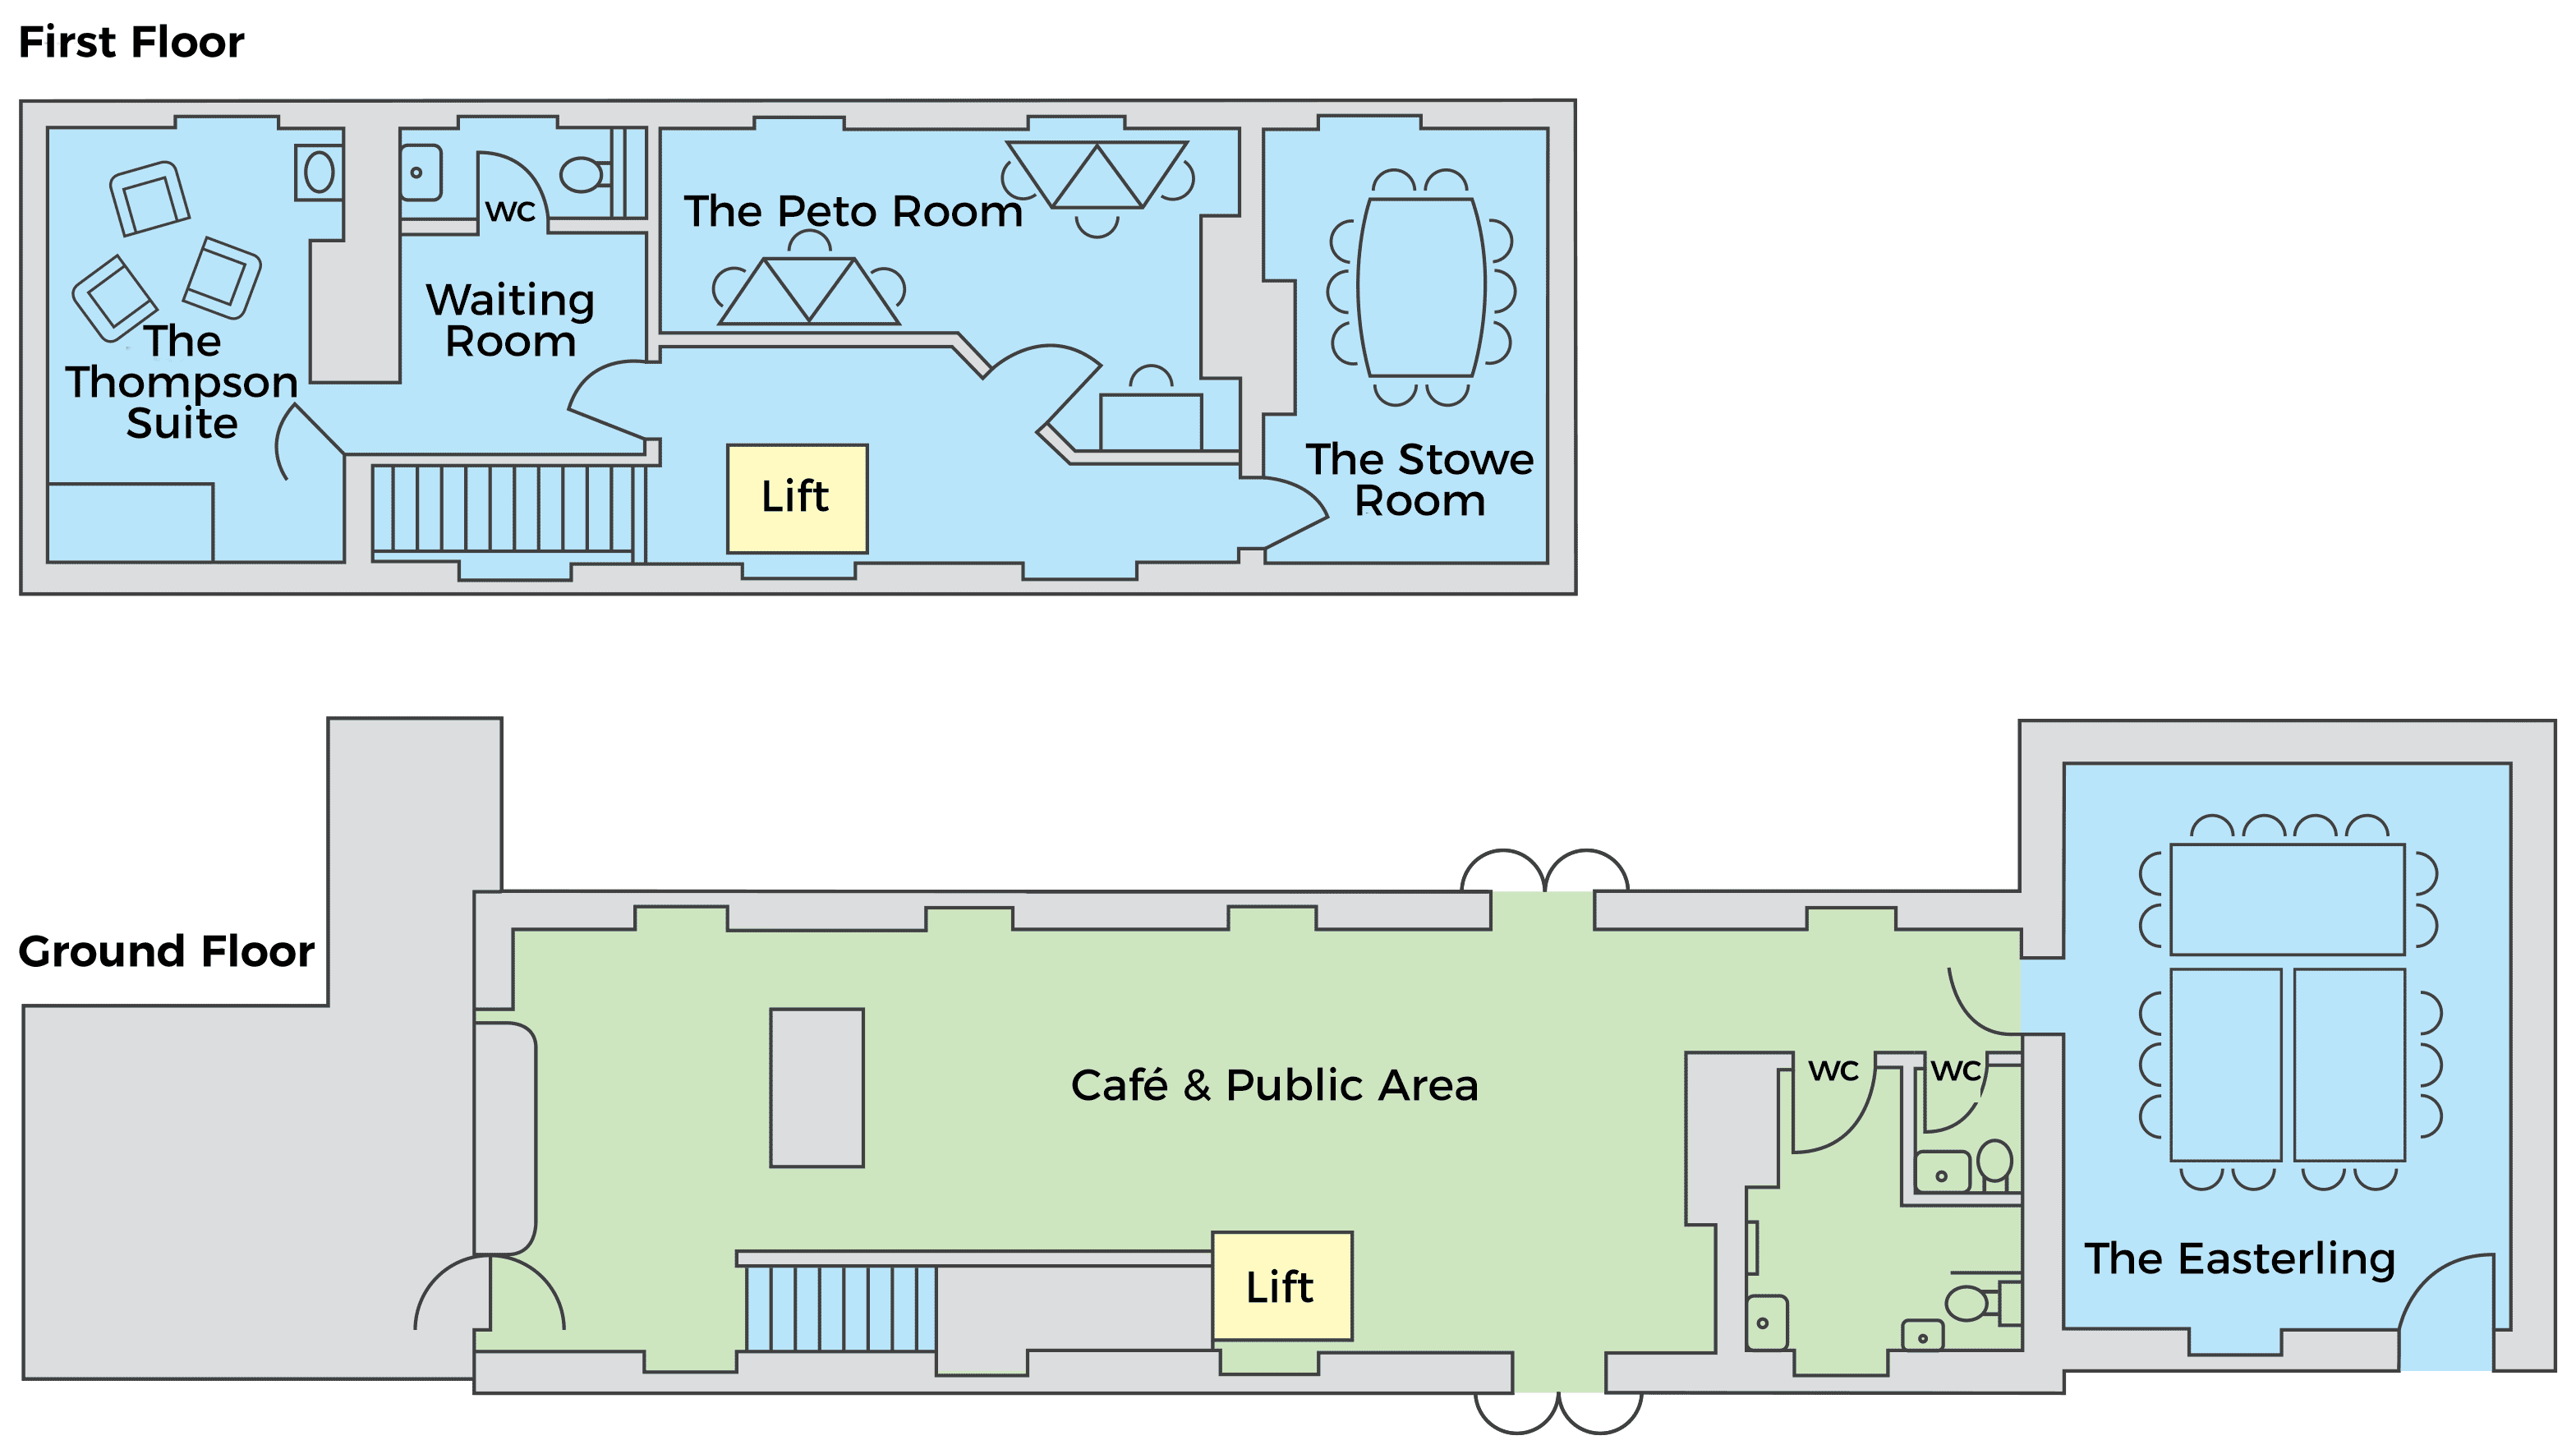 Campsea Ashe Community Connections Ground Floor Plan